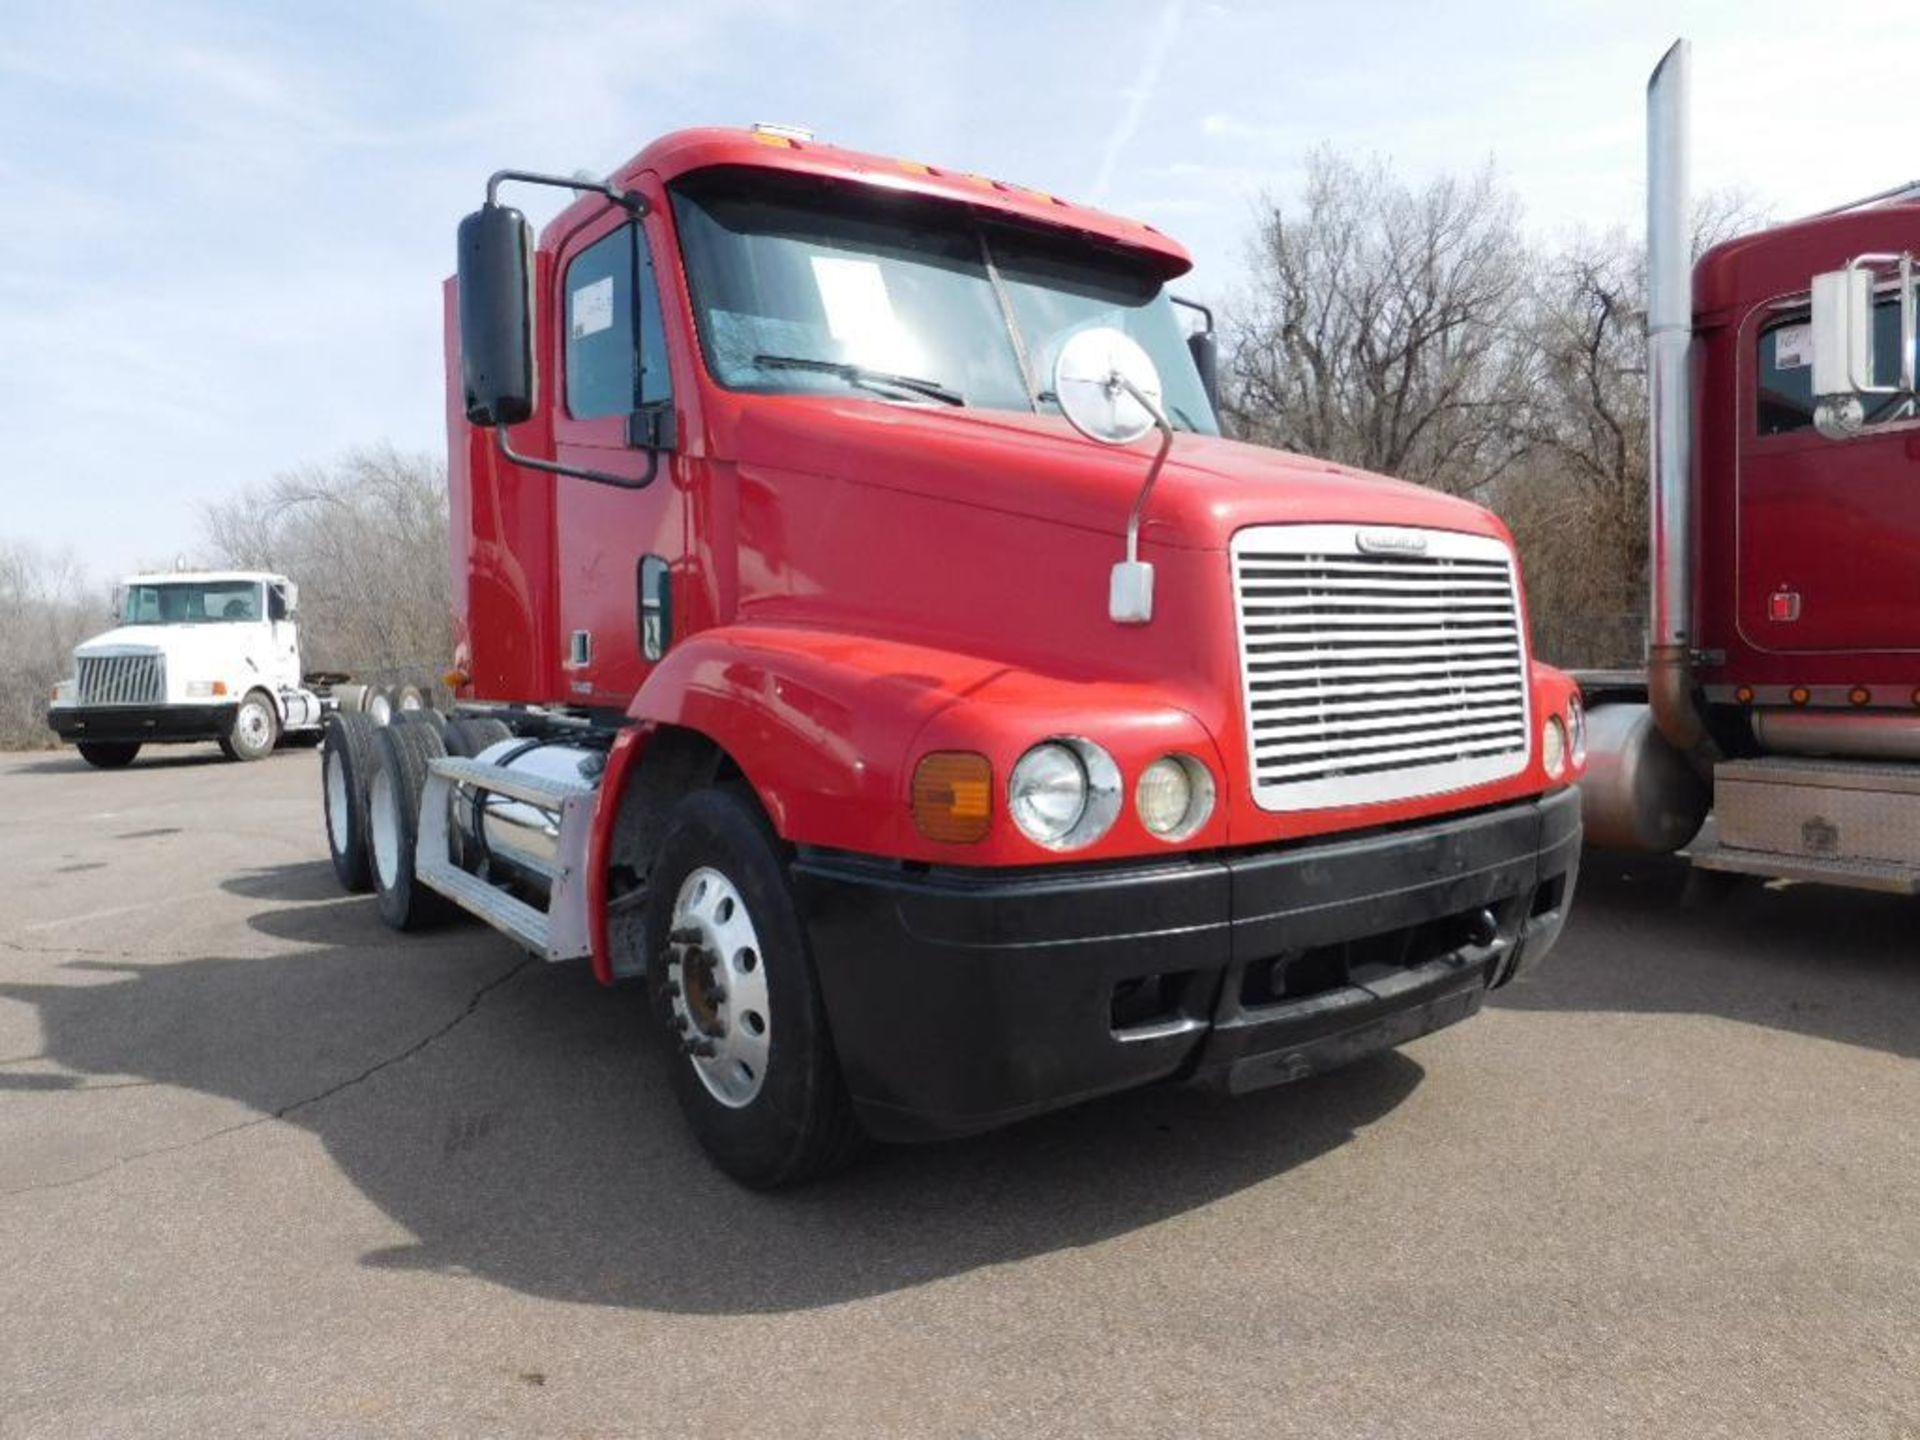 1998 Freightliner Century Class t/a Truck Tractor s/n 1fuynmcb9wp965635, cummins eng, od reads